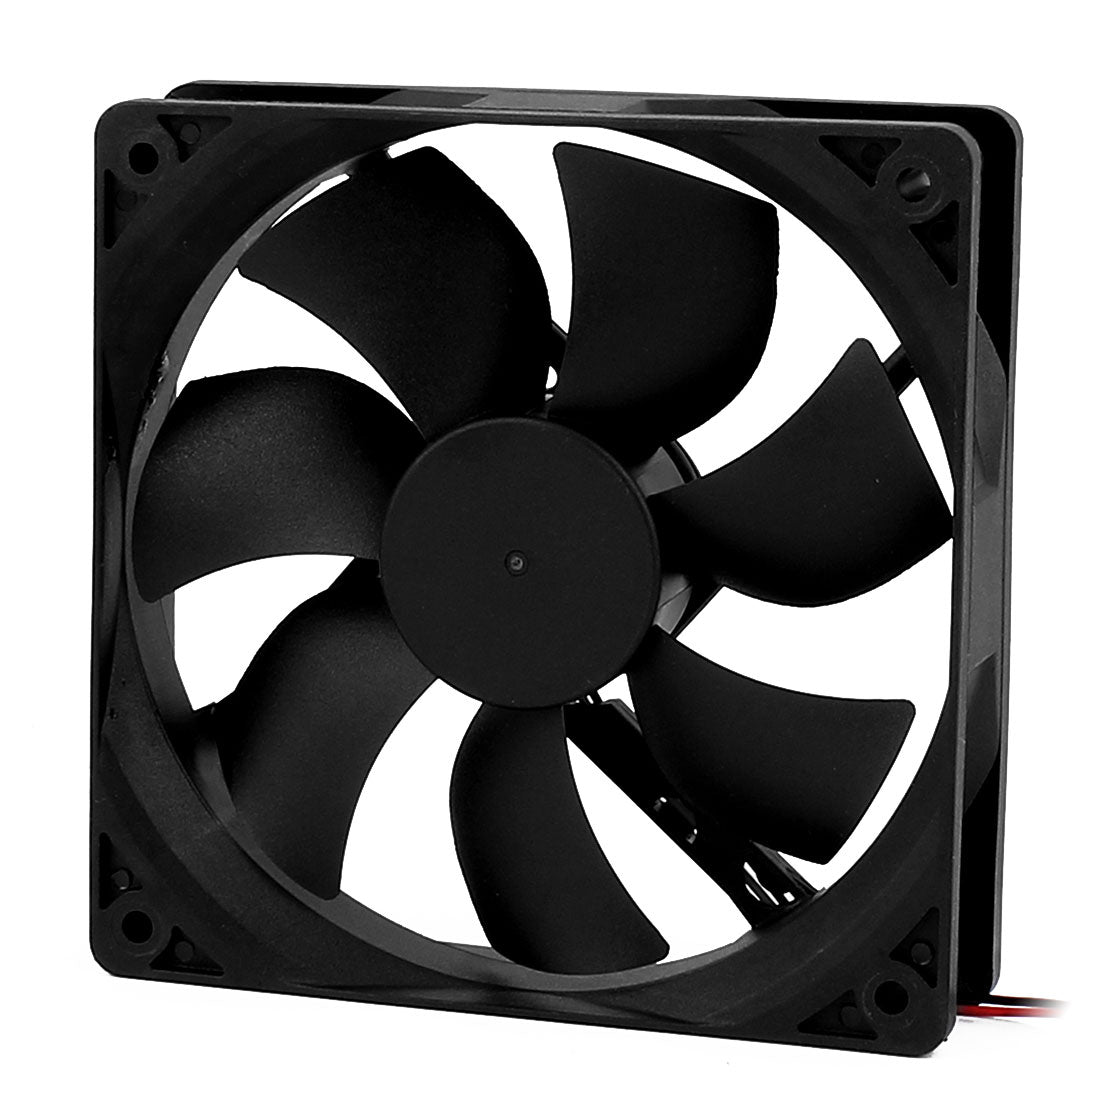 uxcell Uxcell Black Plastic Square 120 x 120 x 25mm DC 24V Heatsink Cooling Fan 2Pcs for PC Case